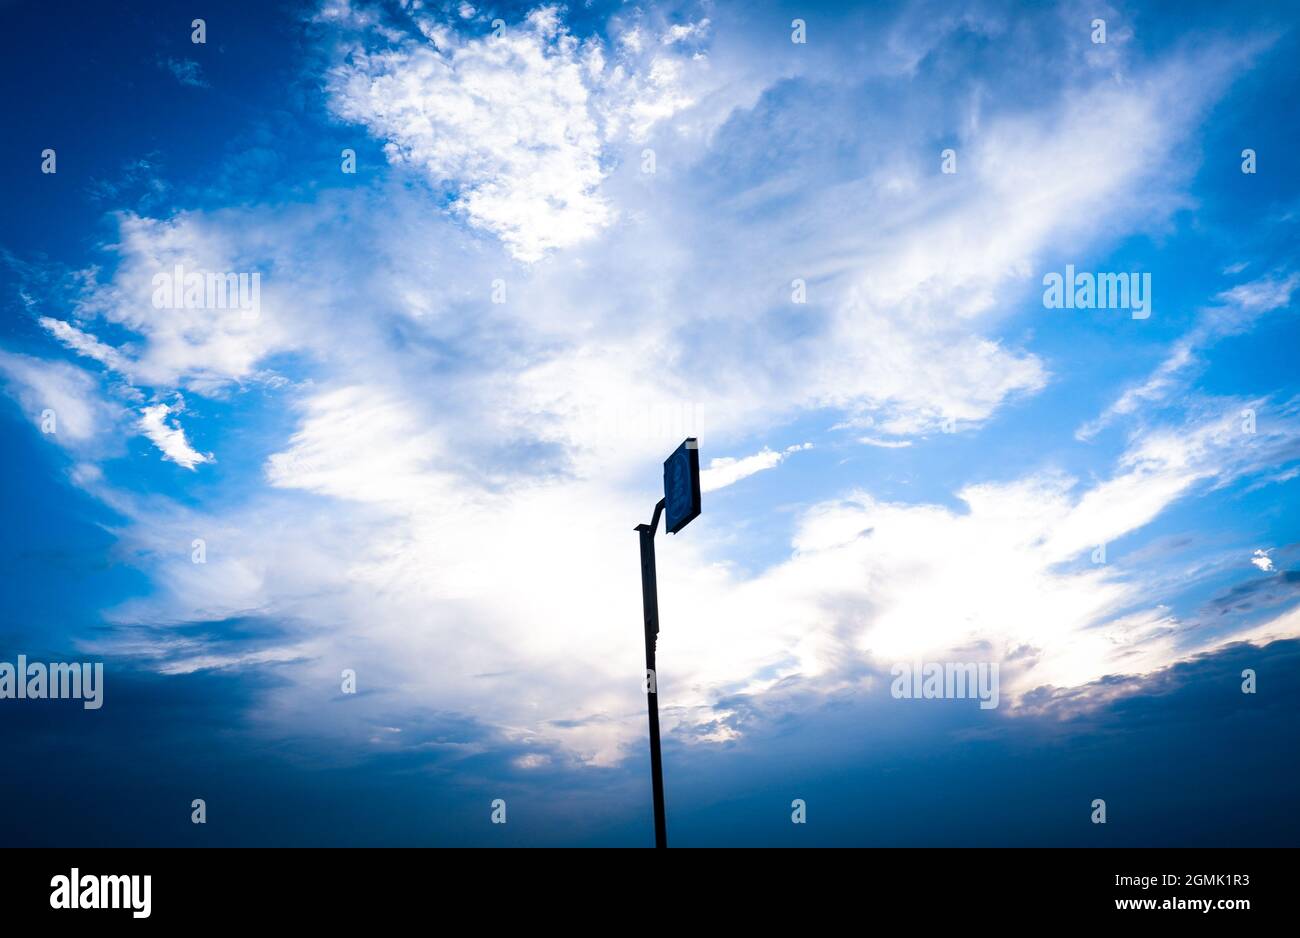 Signpost on a pole against bright blue partly cloudy background Stock Photo